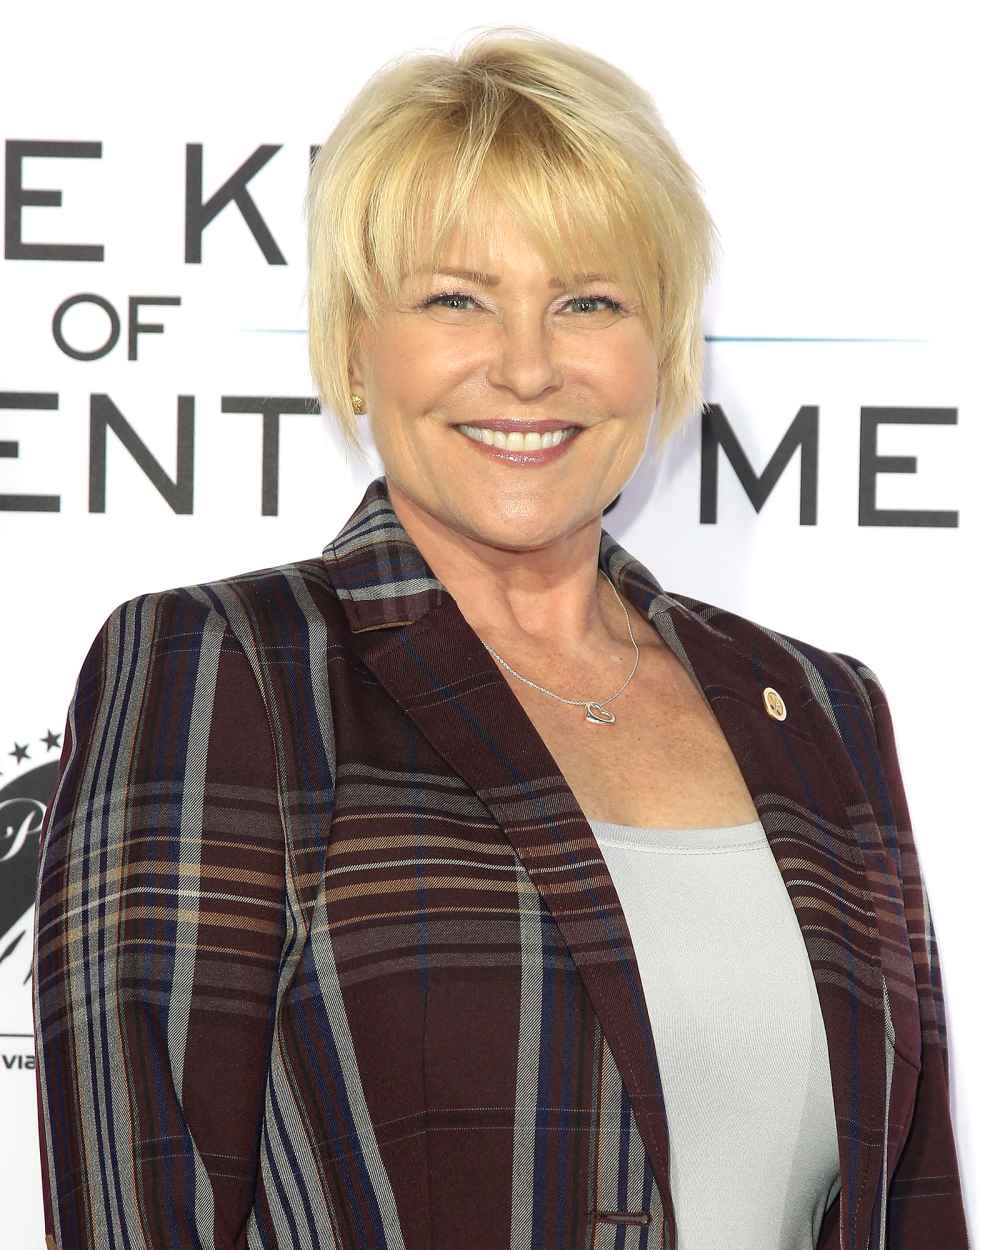 ‘Days of Our Lives’ Star Judi Evans Thanks Fans for Support After Nearly Having Legs Amputated Due to Coronavirus